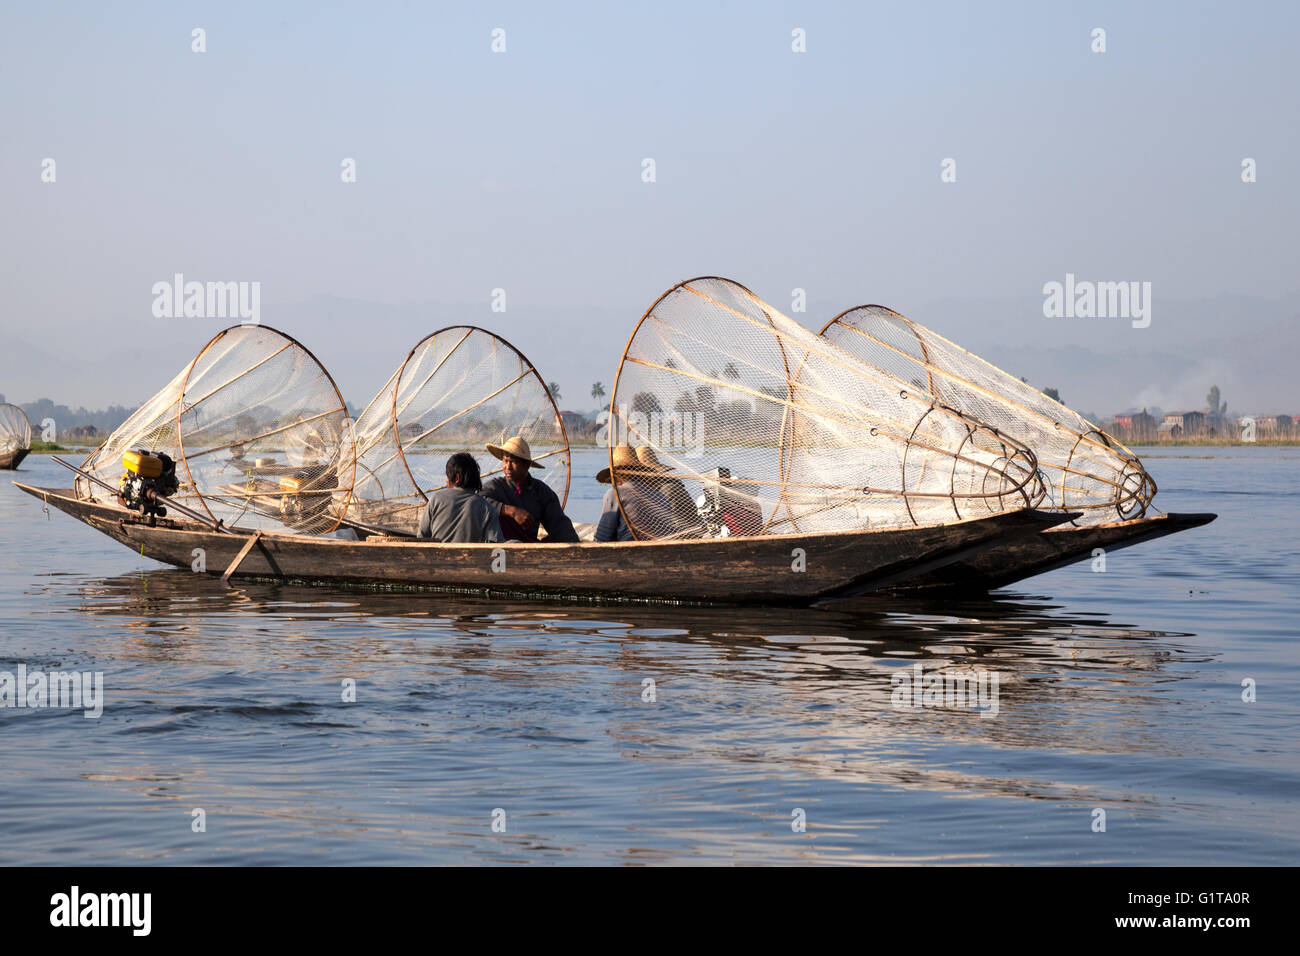 On the Inle Lake, two motorized pirogues anchored side by side with fishermen resting a while (Myanmar). Stock Photo